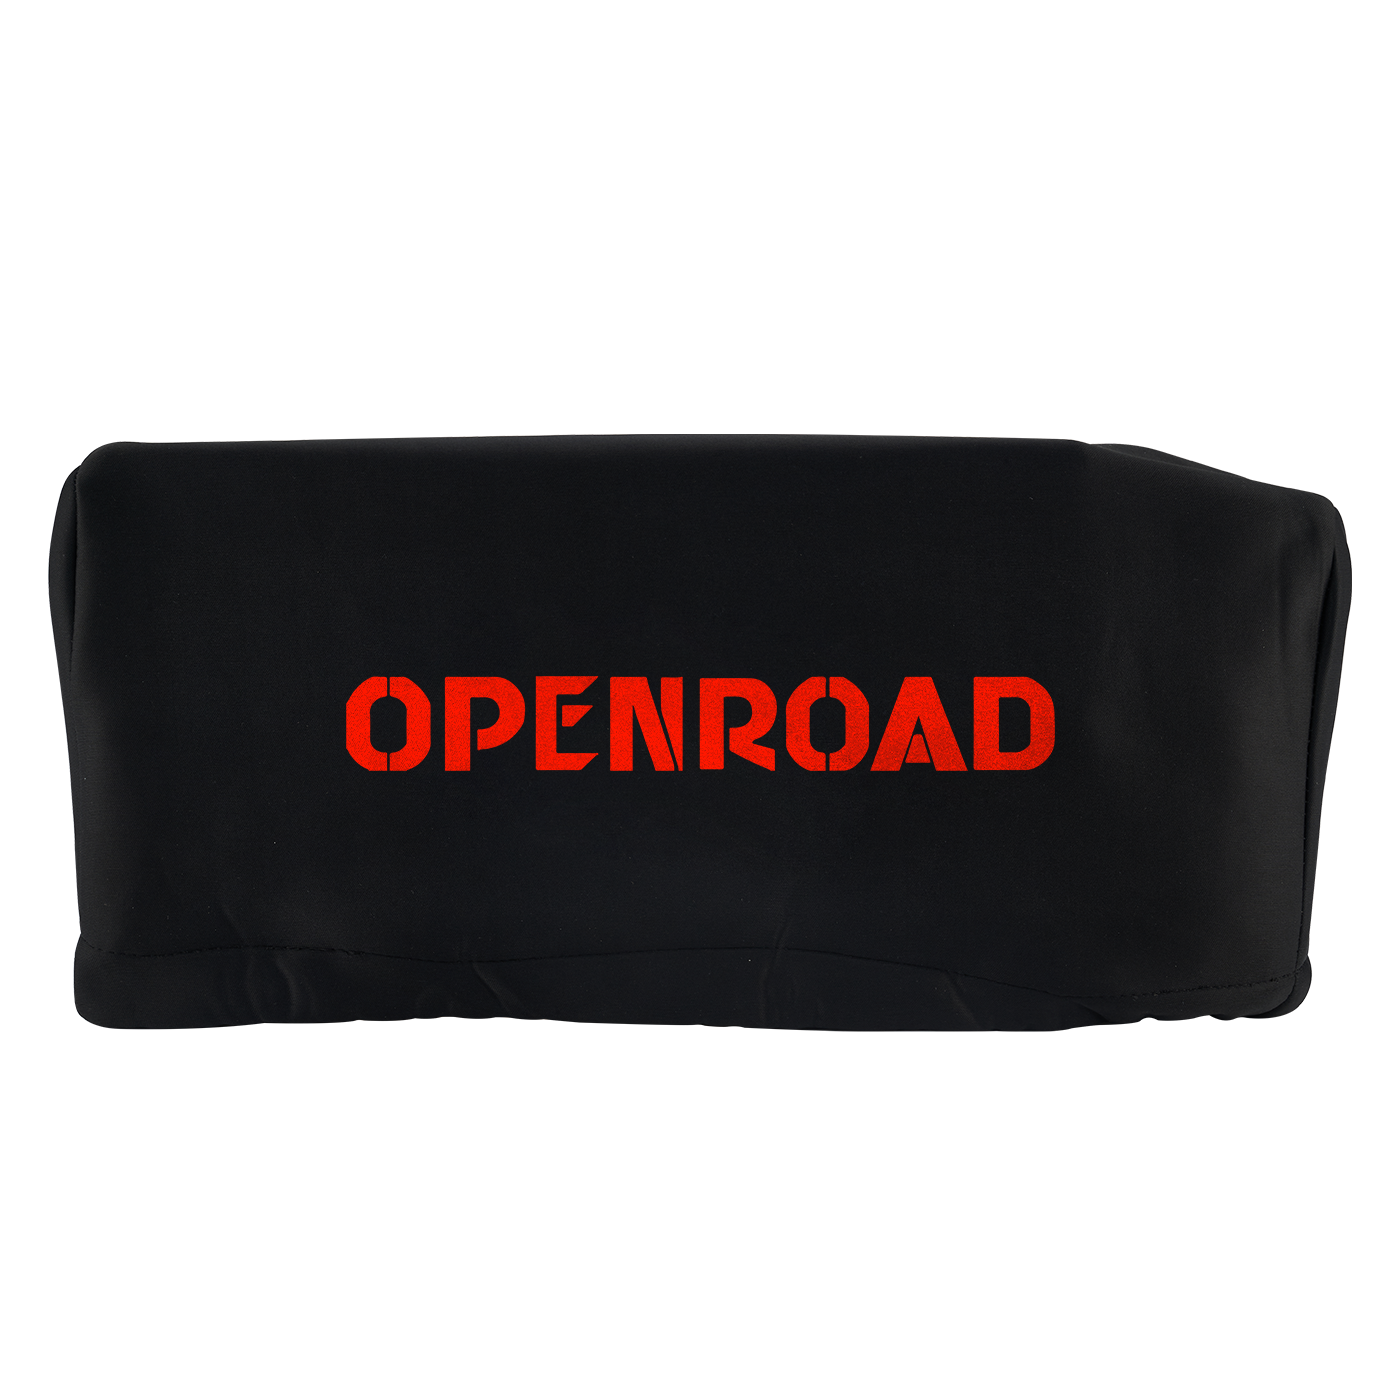 Winch Protection Cover Heavy Duty Waterproof Dust-Proof Black Neoprene,Ideal for 2000-17500 lbs winch accessories OPENROAD   